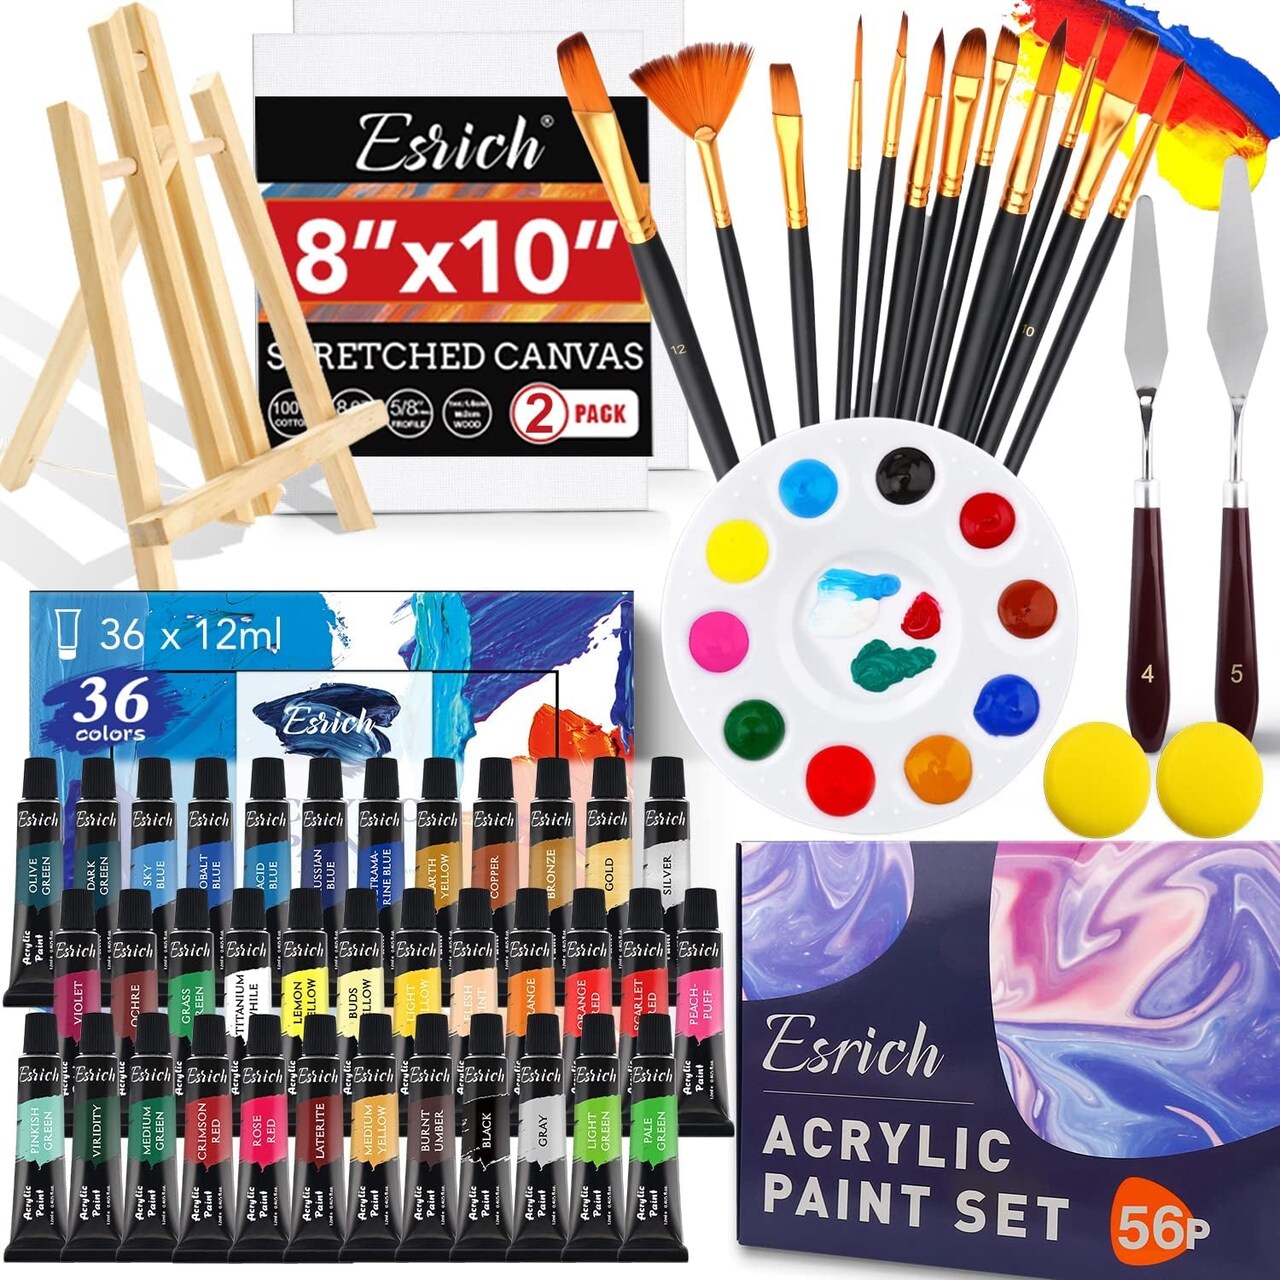 Acrylic Paint Set,57 PCS Professional Painting Supplies with Paint Brushes,  Acrylic Paint, Easel, Canvases, Painting Pads，Palette, Paint Knife, Brush  Cup and Art Sponge for Hobbyists and Beginners